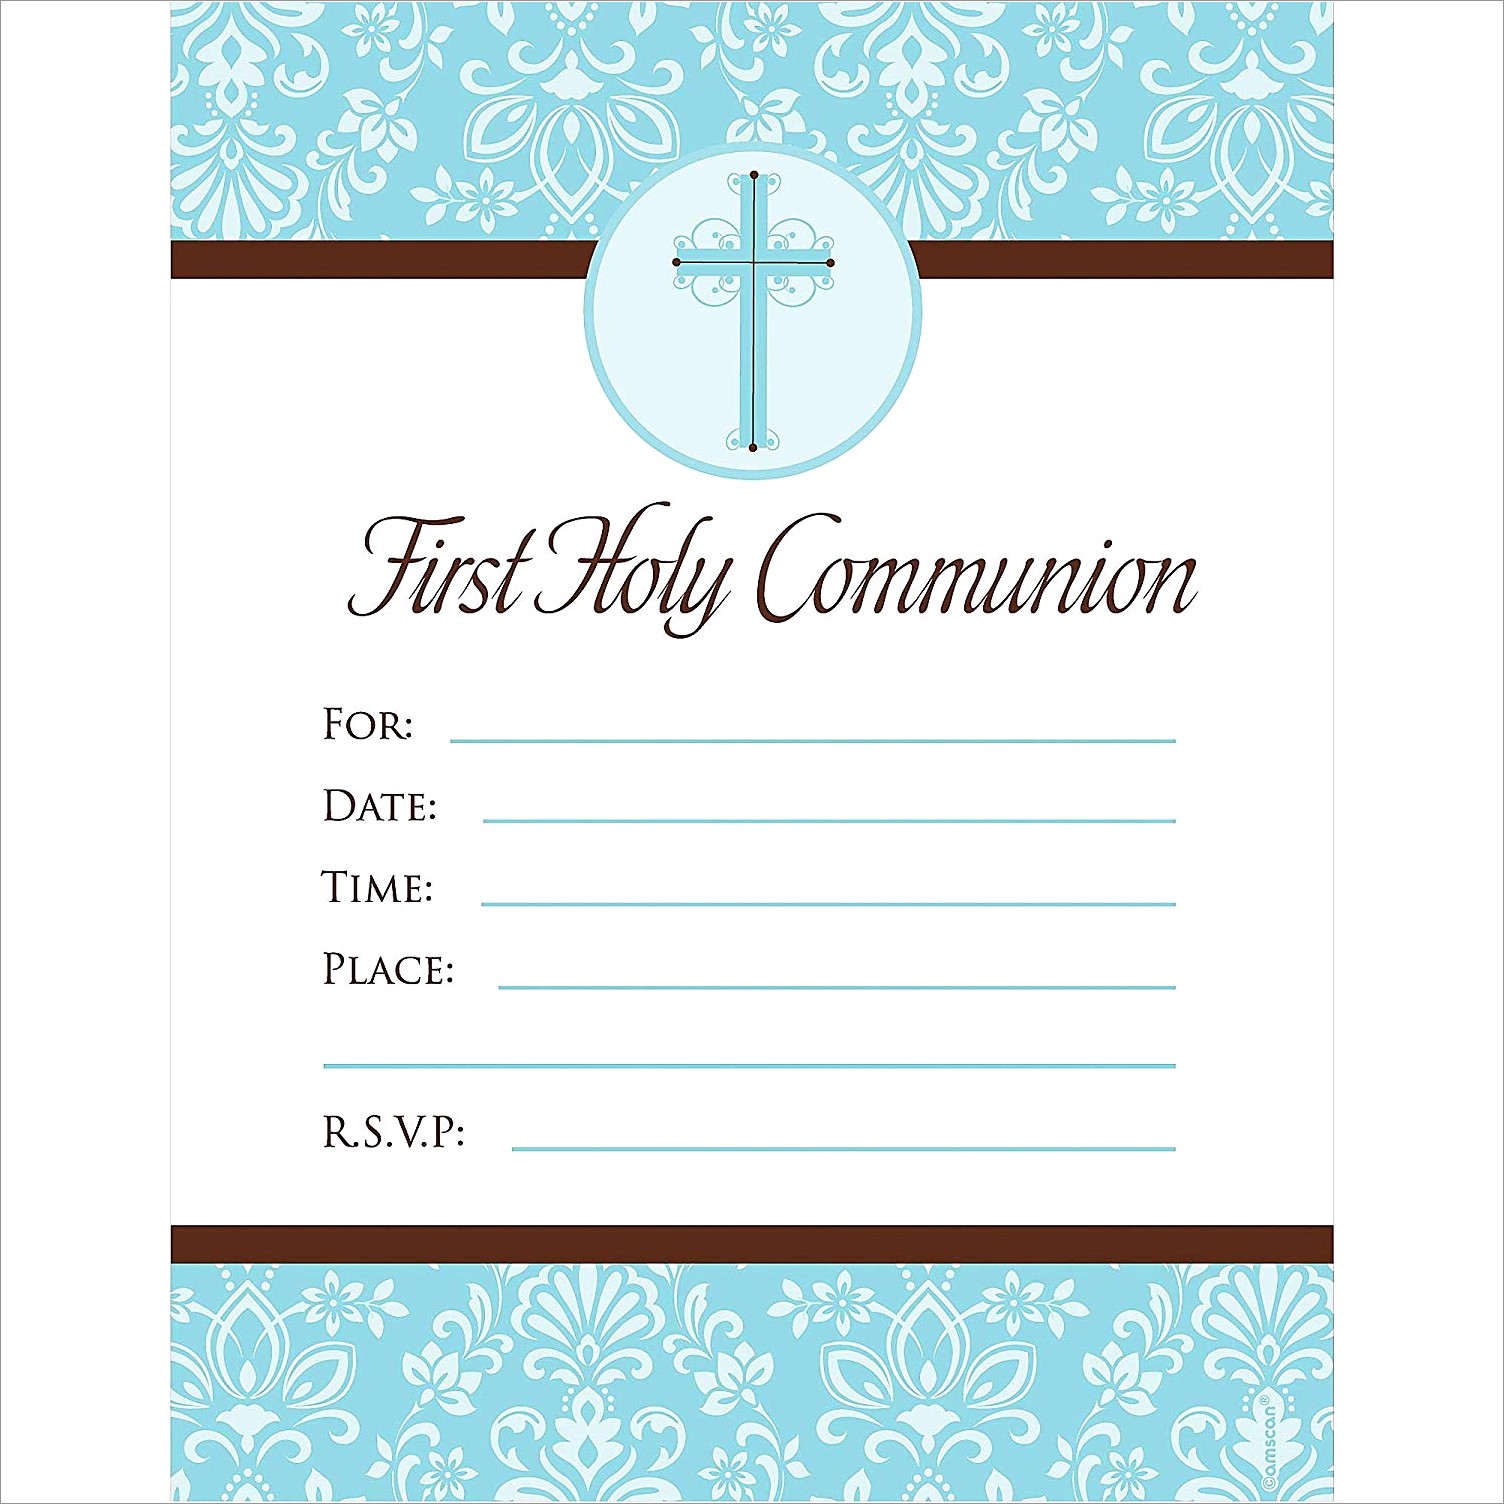 First Holy Communion Invitations With Photo